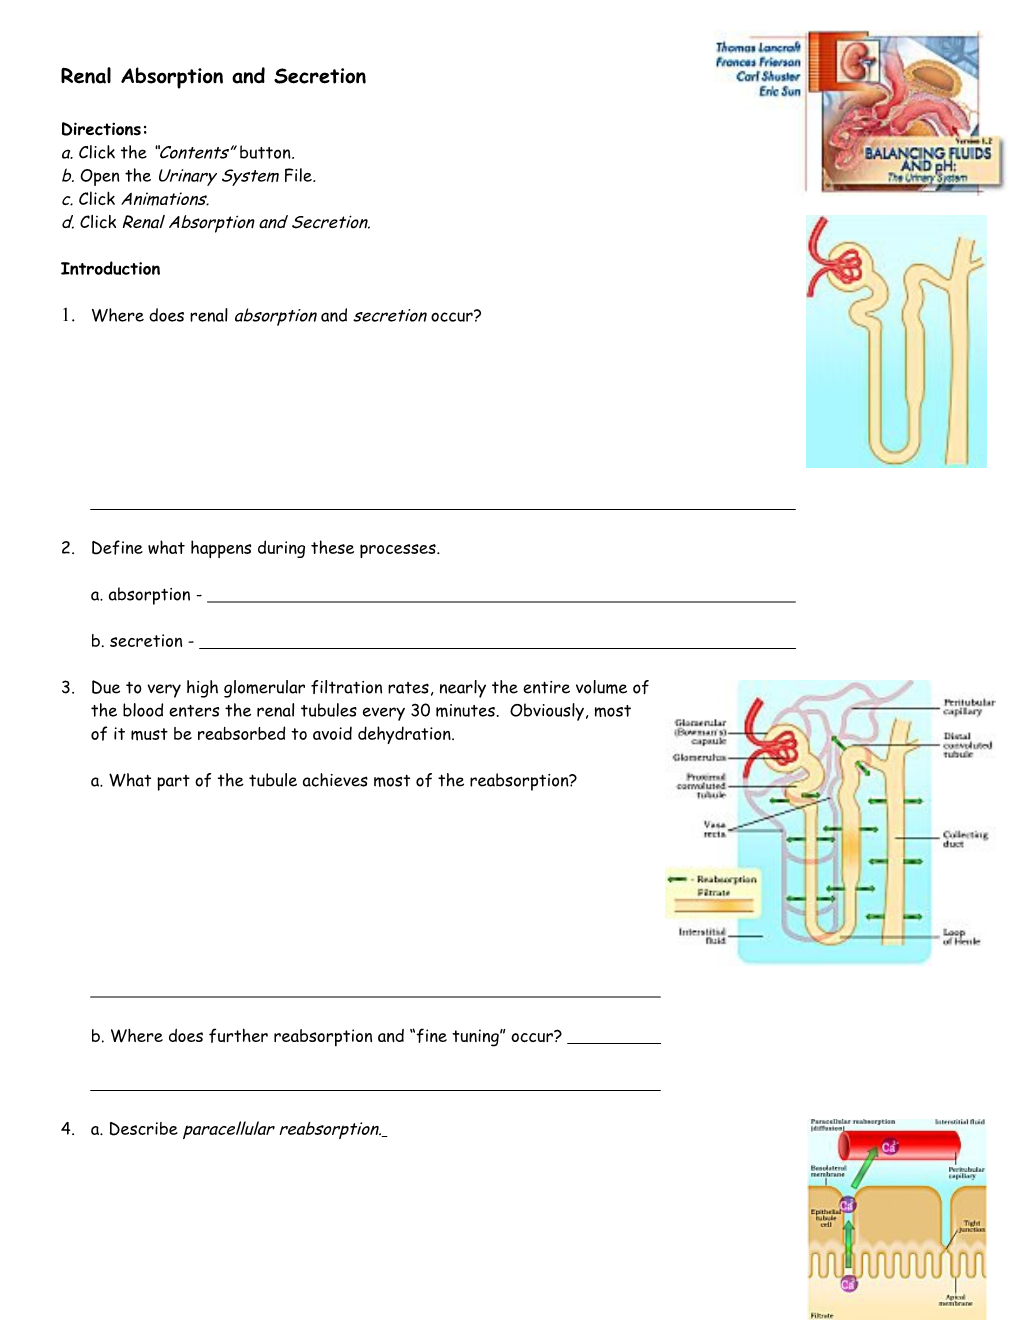 Endocrine System: Overview s3